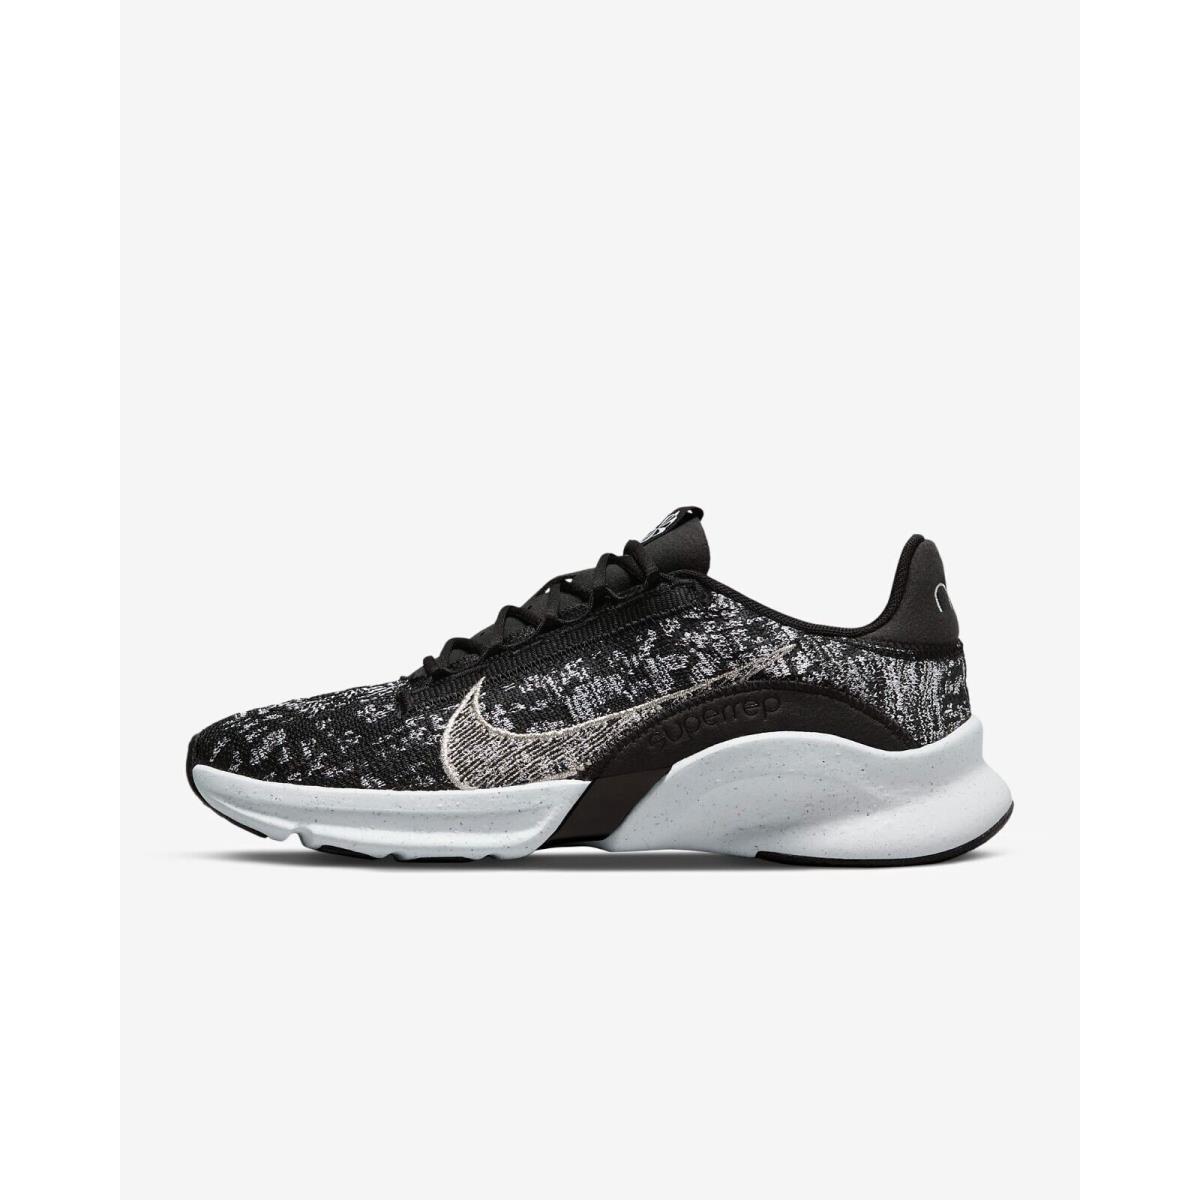 Nike Superrep Go 3 Flyknit Next Nature DH3393-010 Women Black/white Shoes NX252